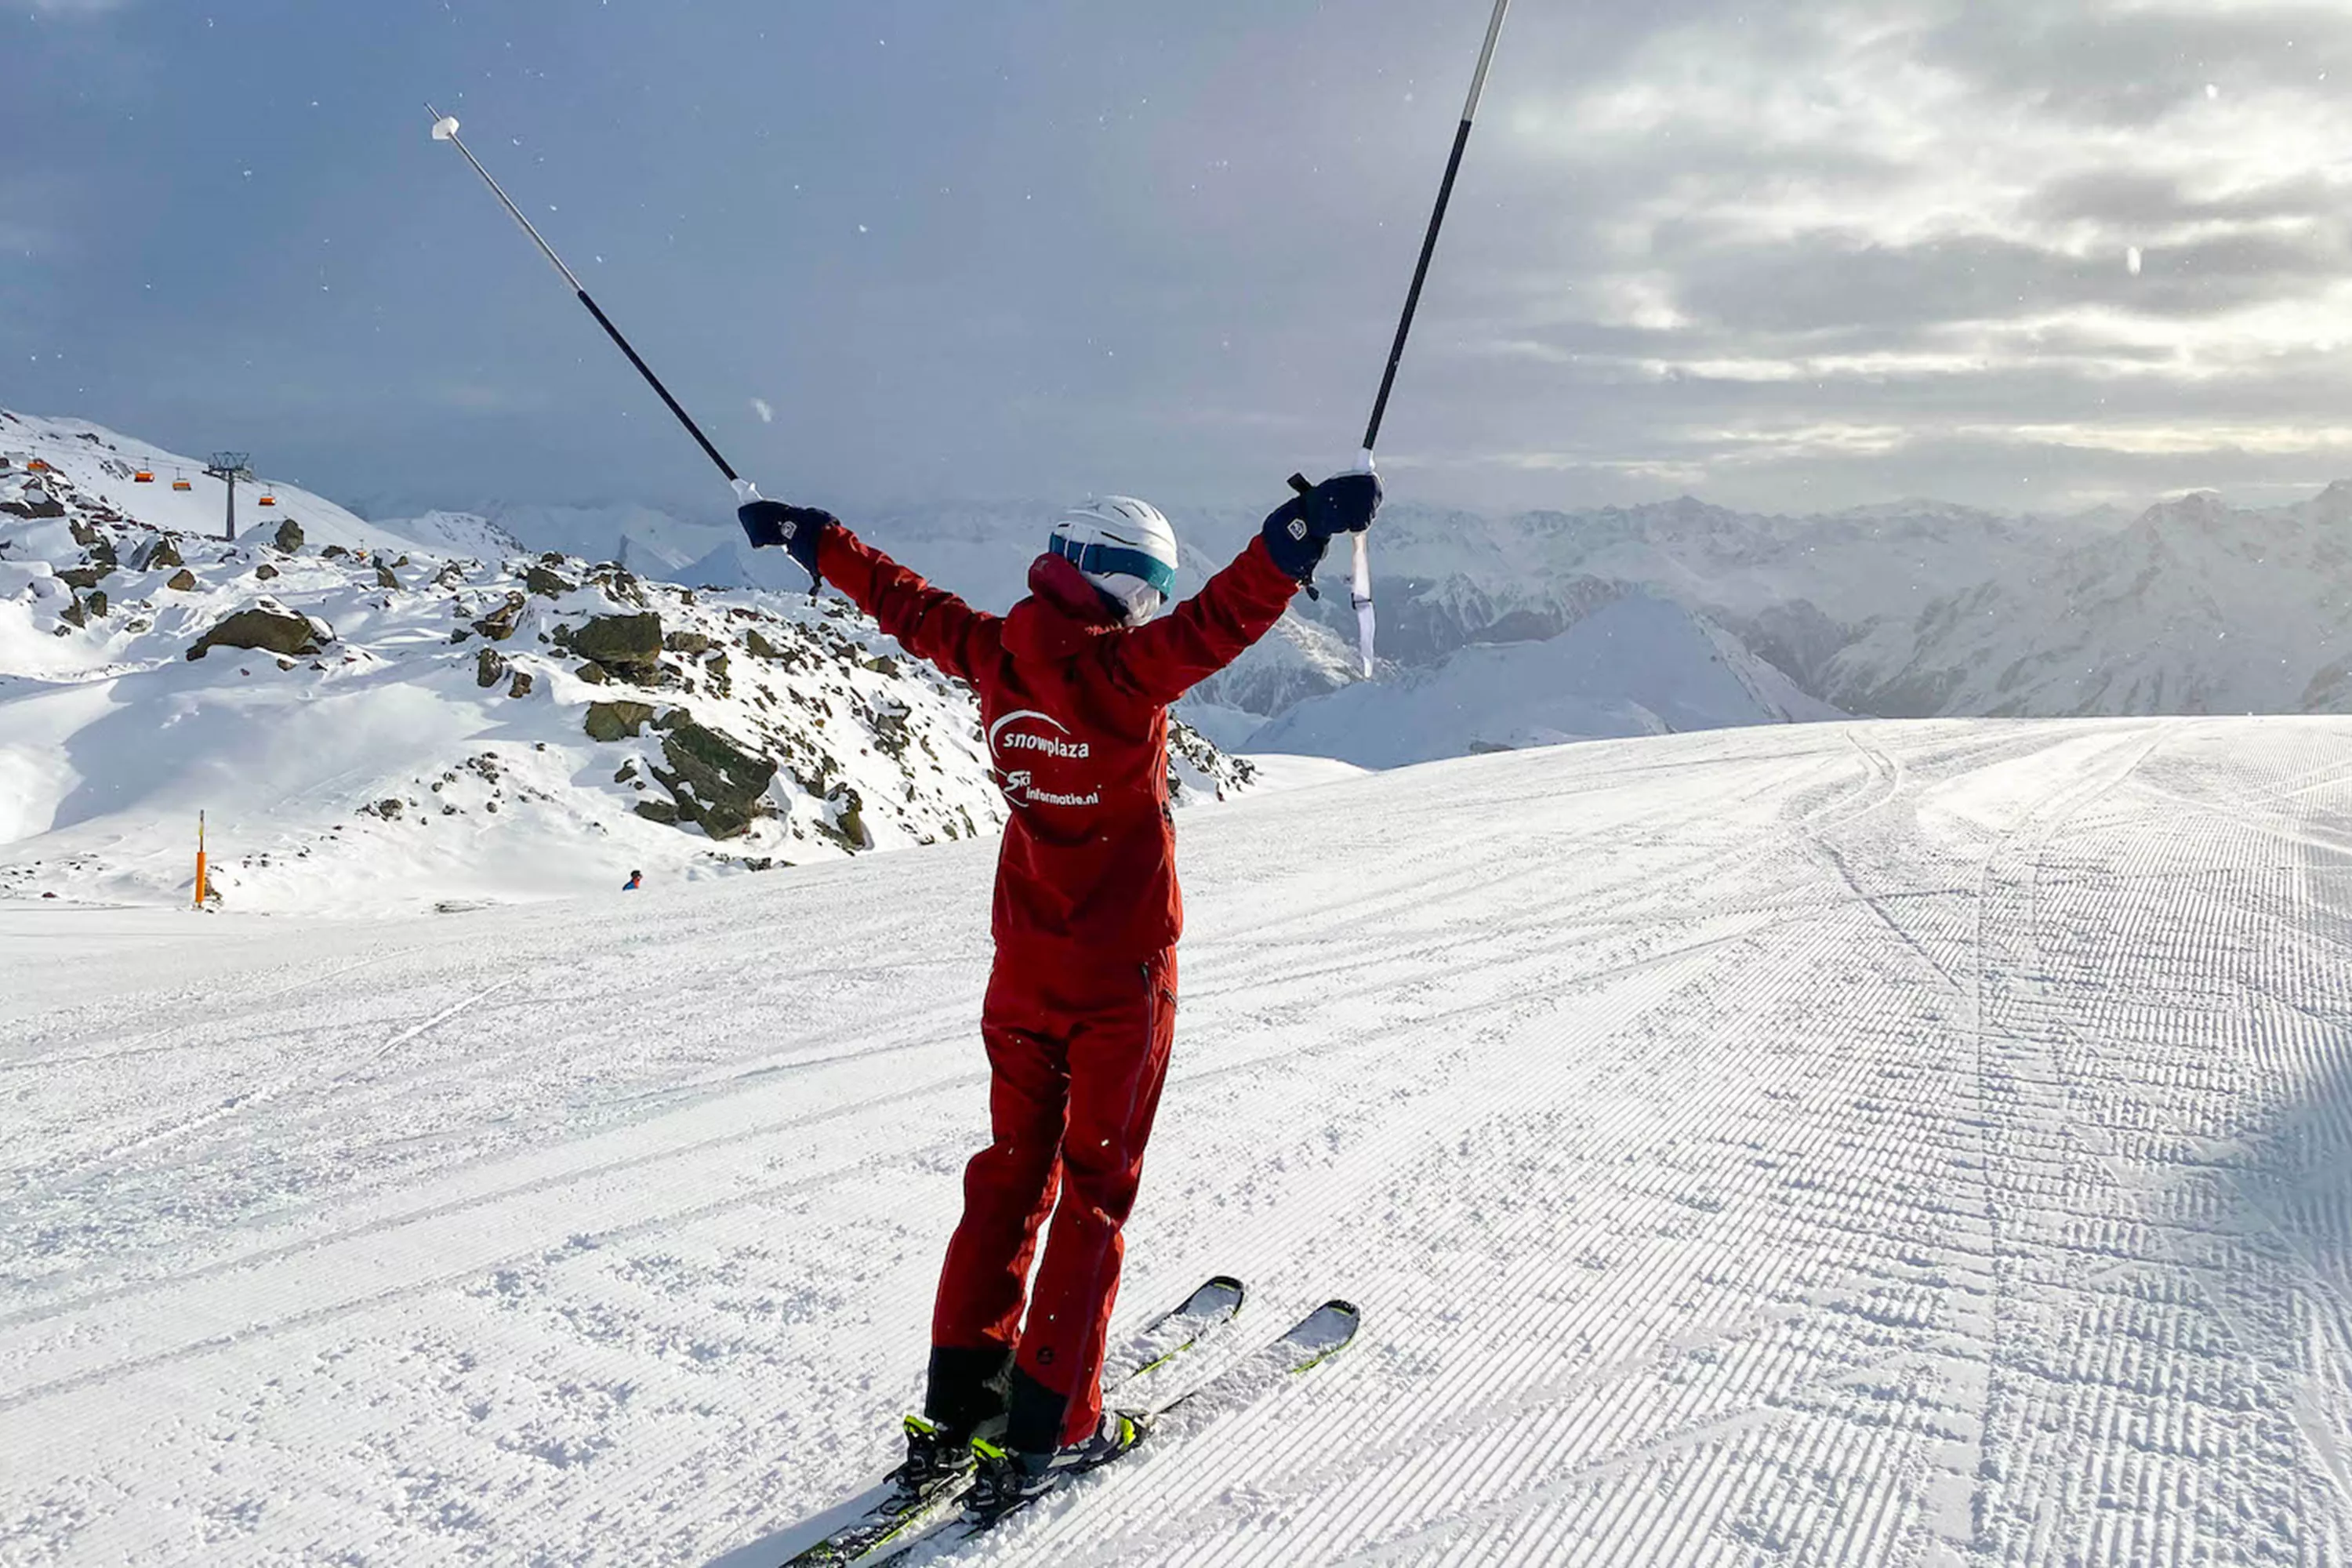 Learning to ski for adults: Q&A